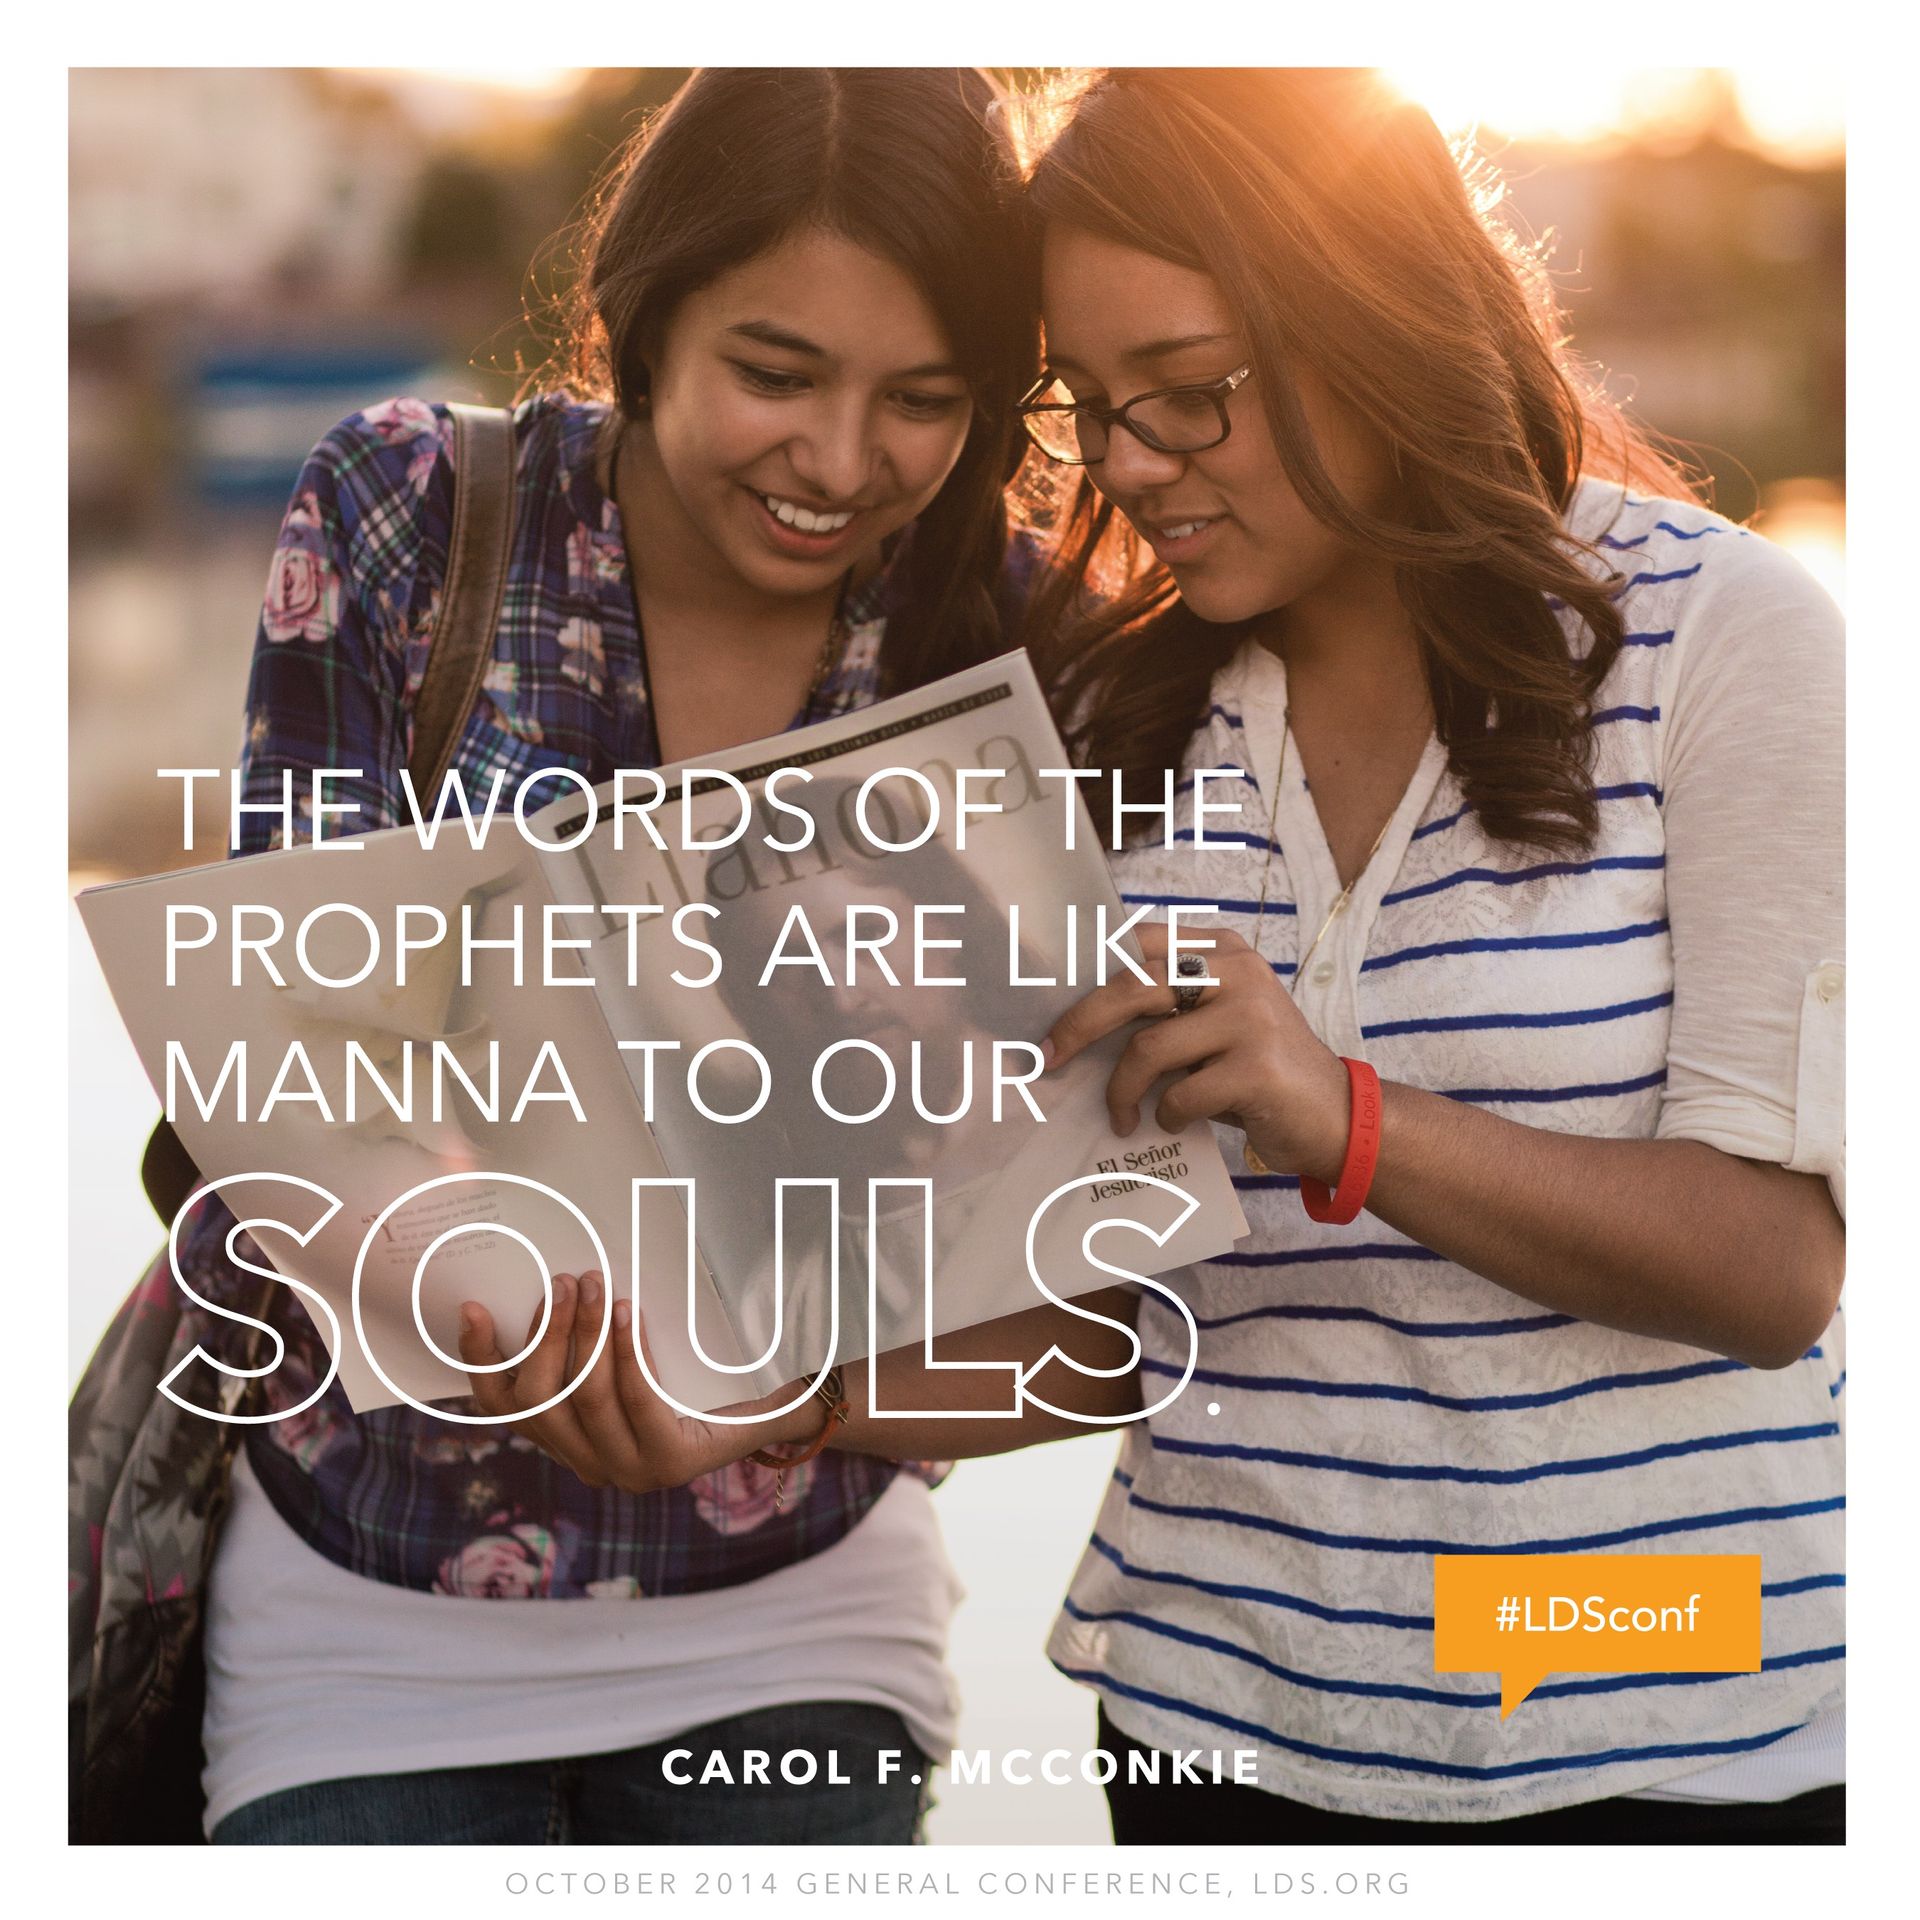 “The words of the prophets are like manna to our souls.”—Sister Carol F. McConkie, “Live according to the Words of the Prophets” © undefined ipCode 1.